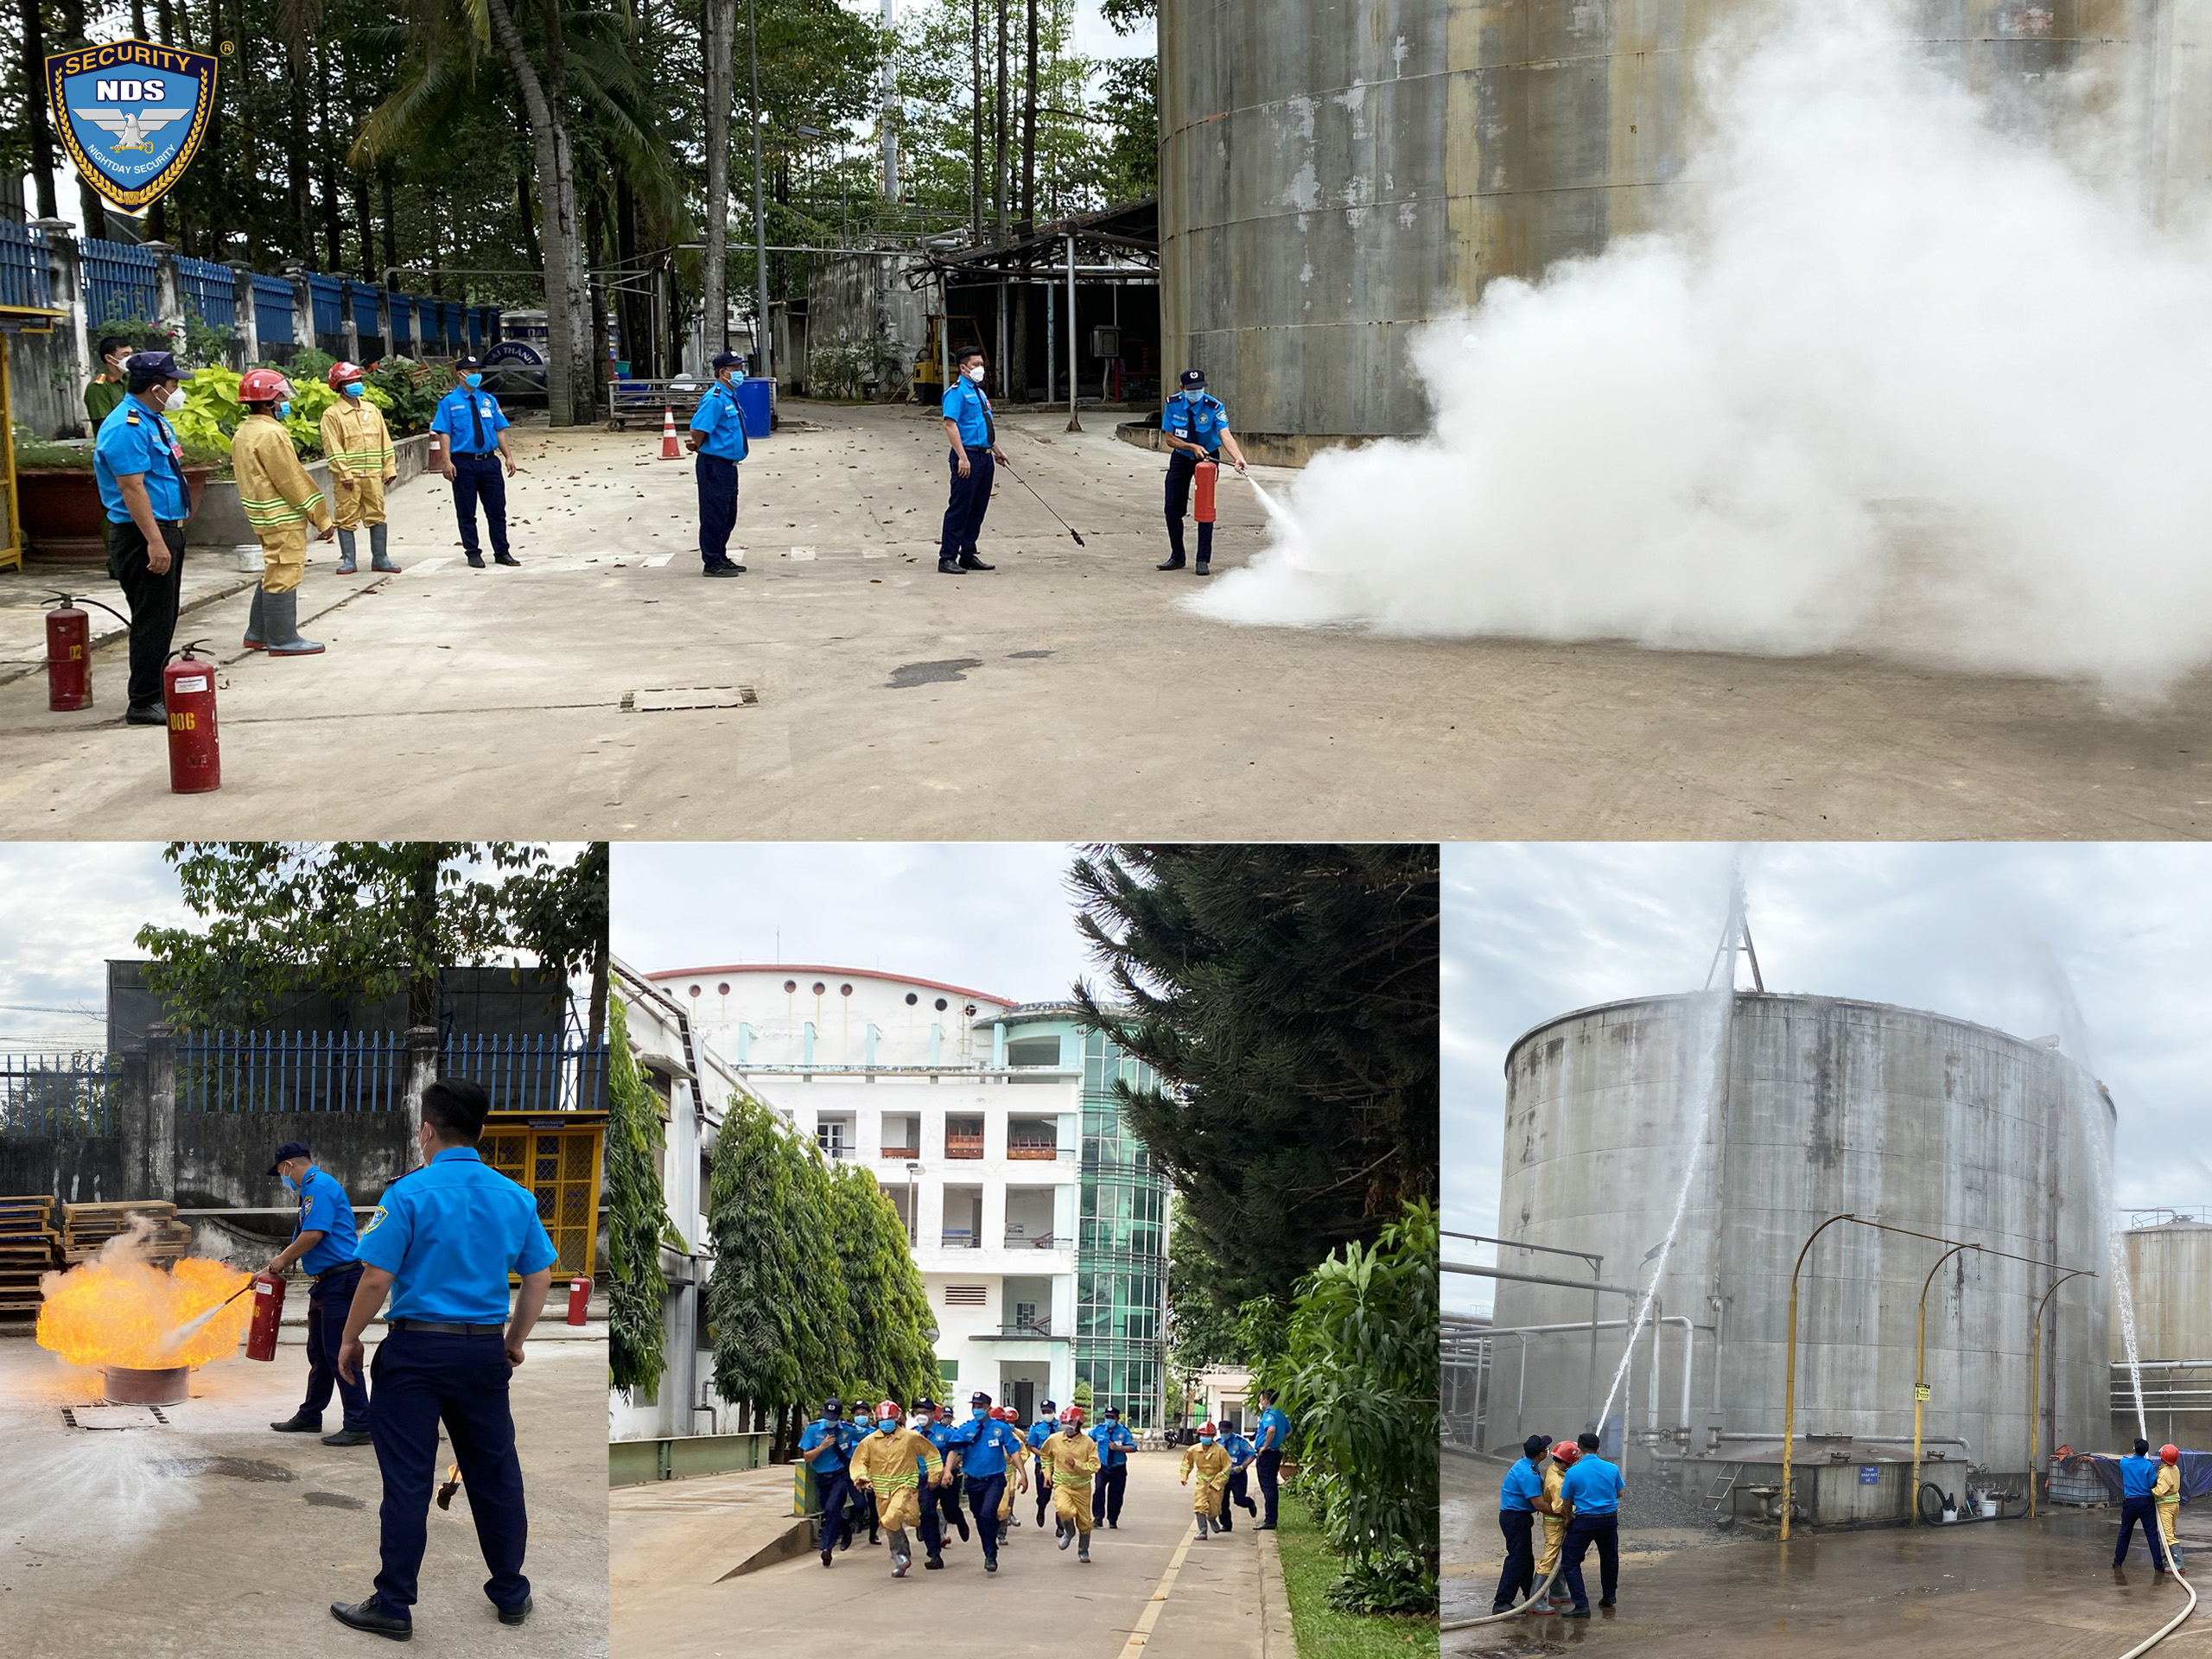 Pictures of fire drills at AB Mauri Company